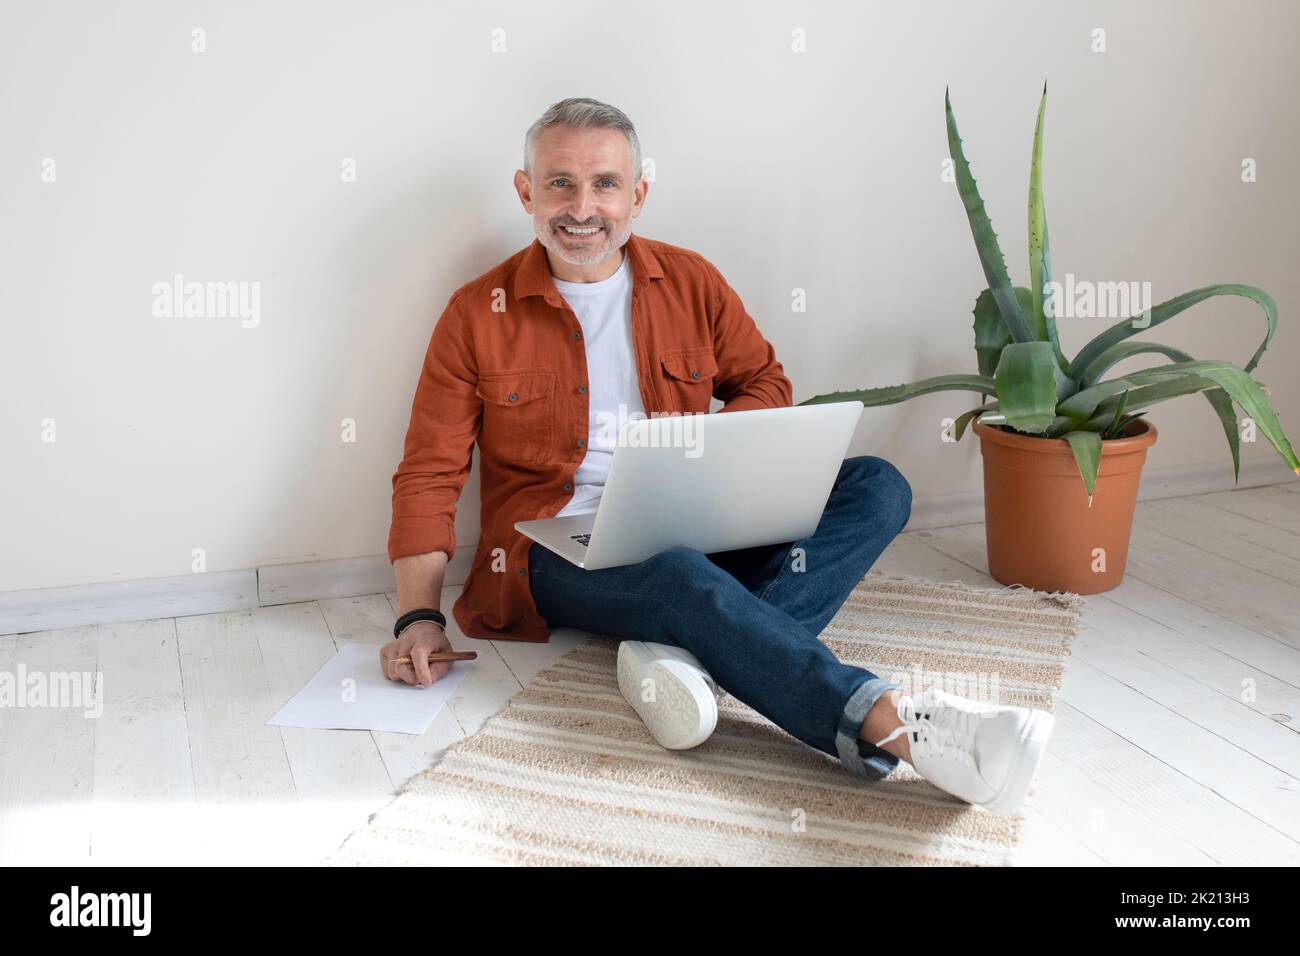 Bearded man in terracotta shirt working from home Stock Photo